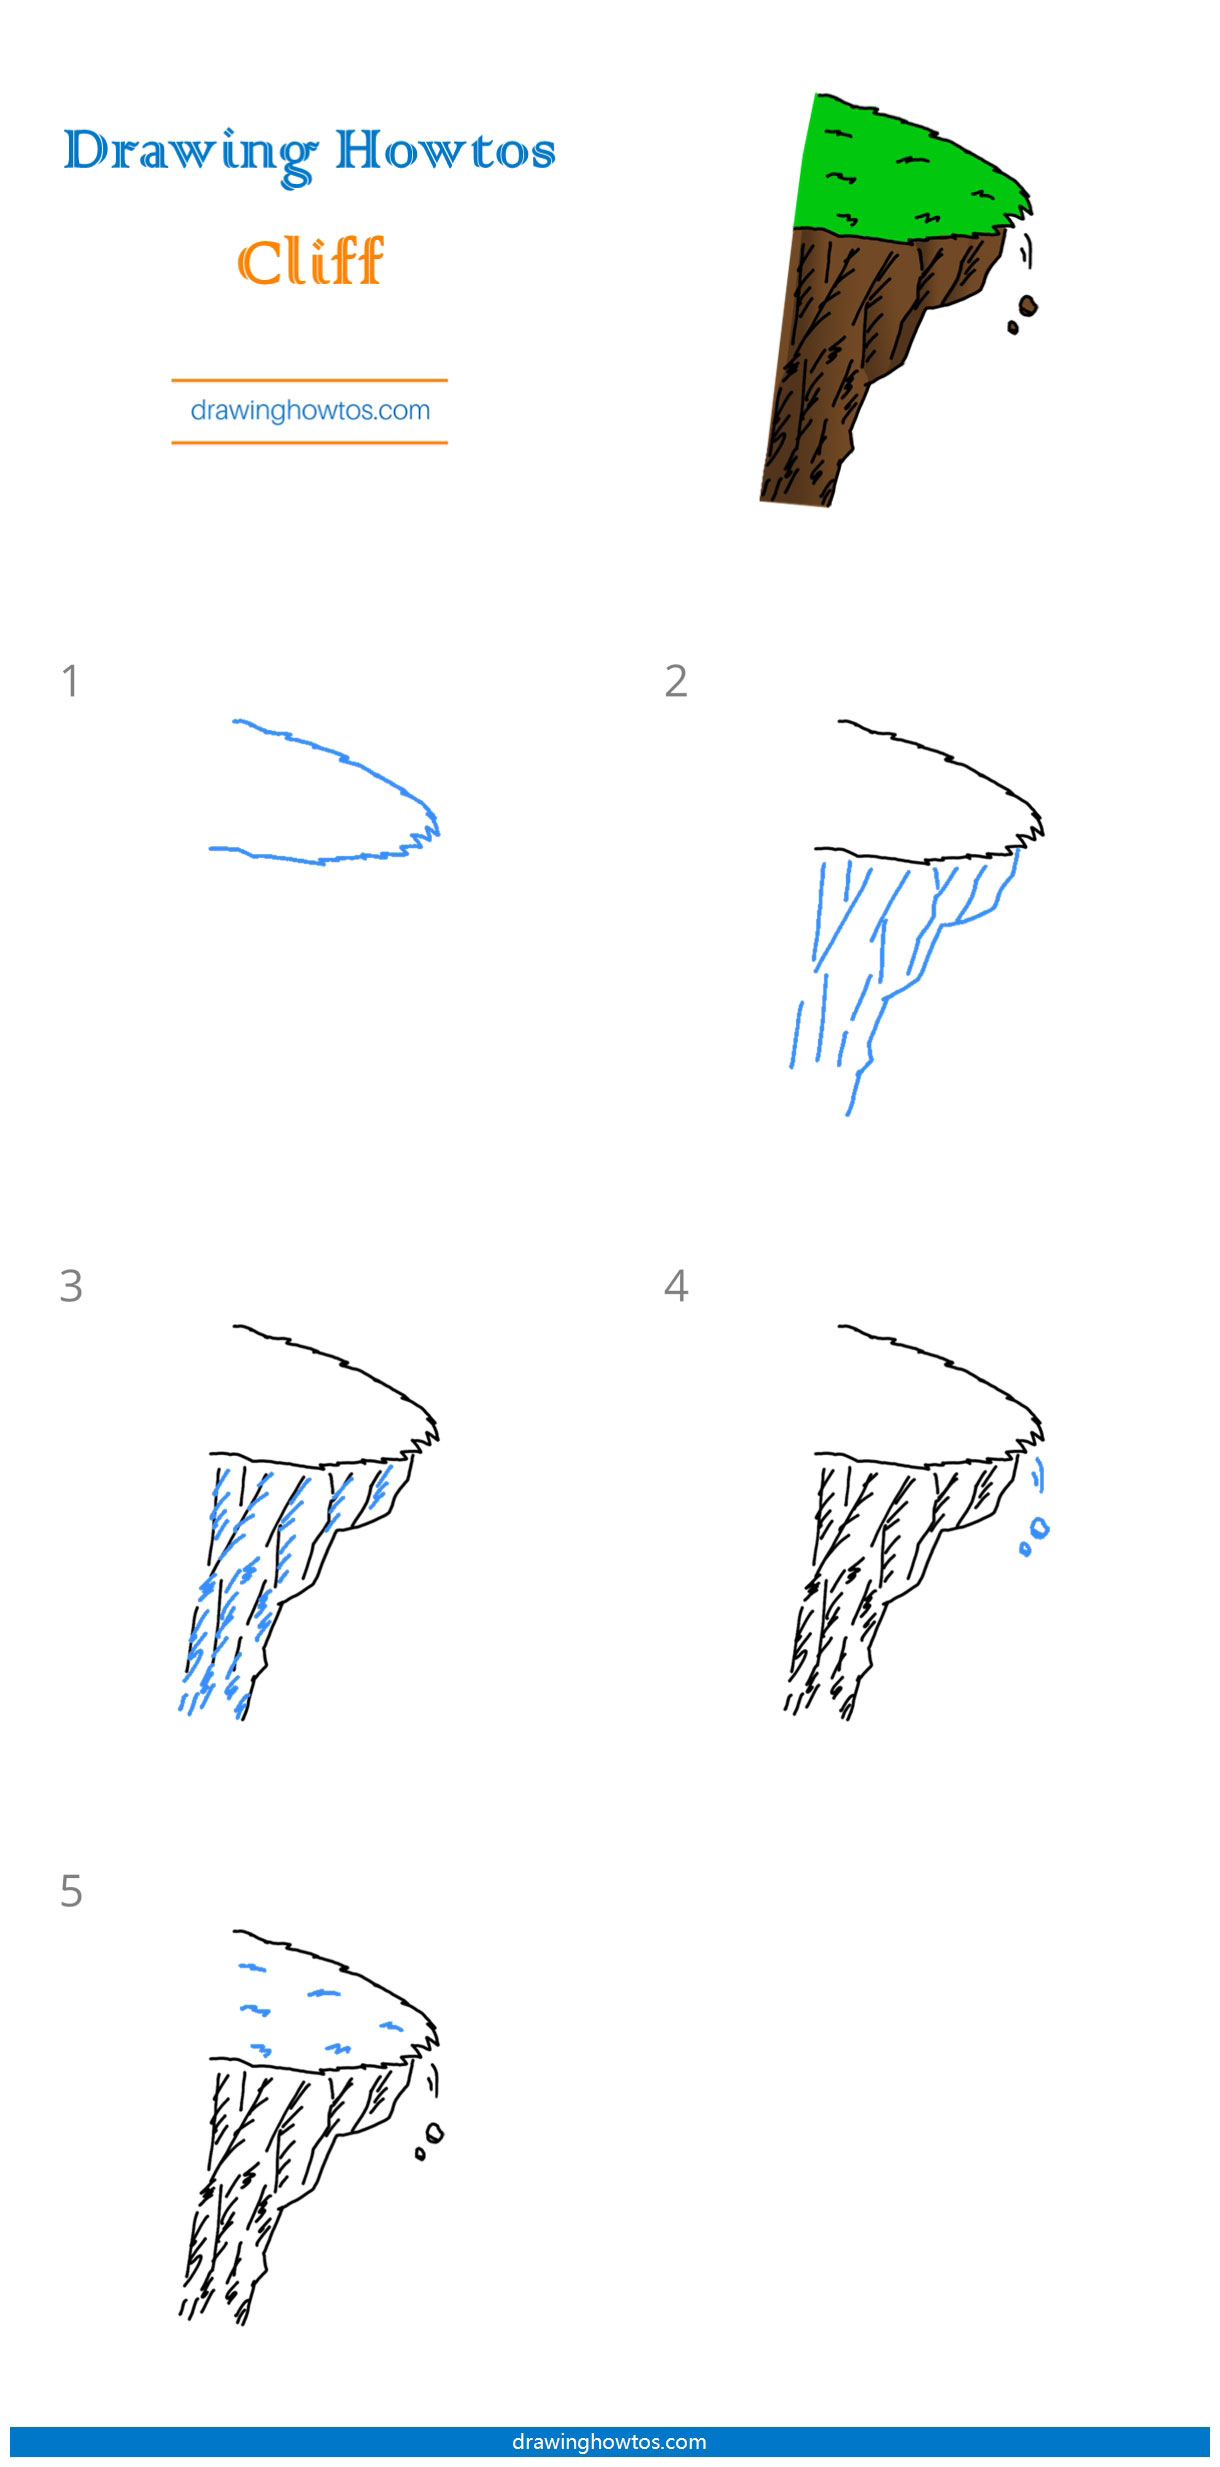 How to Draw a Cliff Step by Step